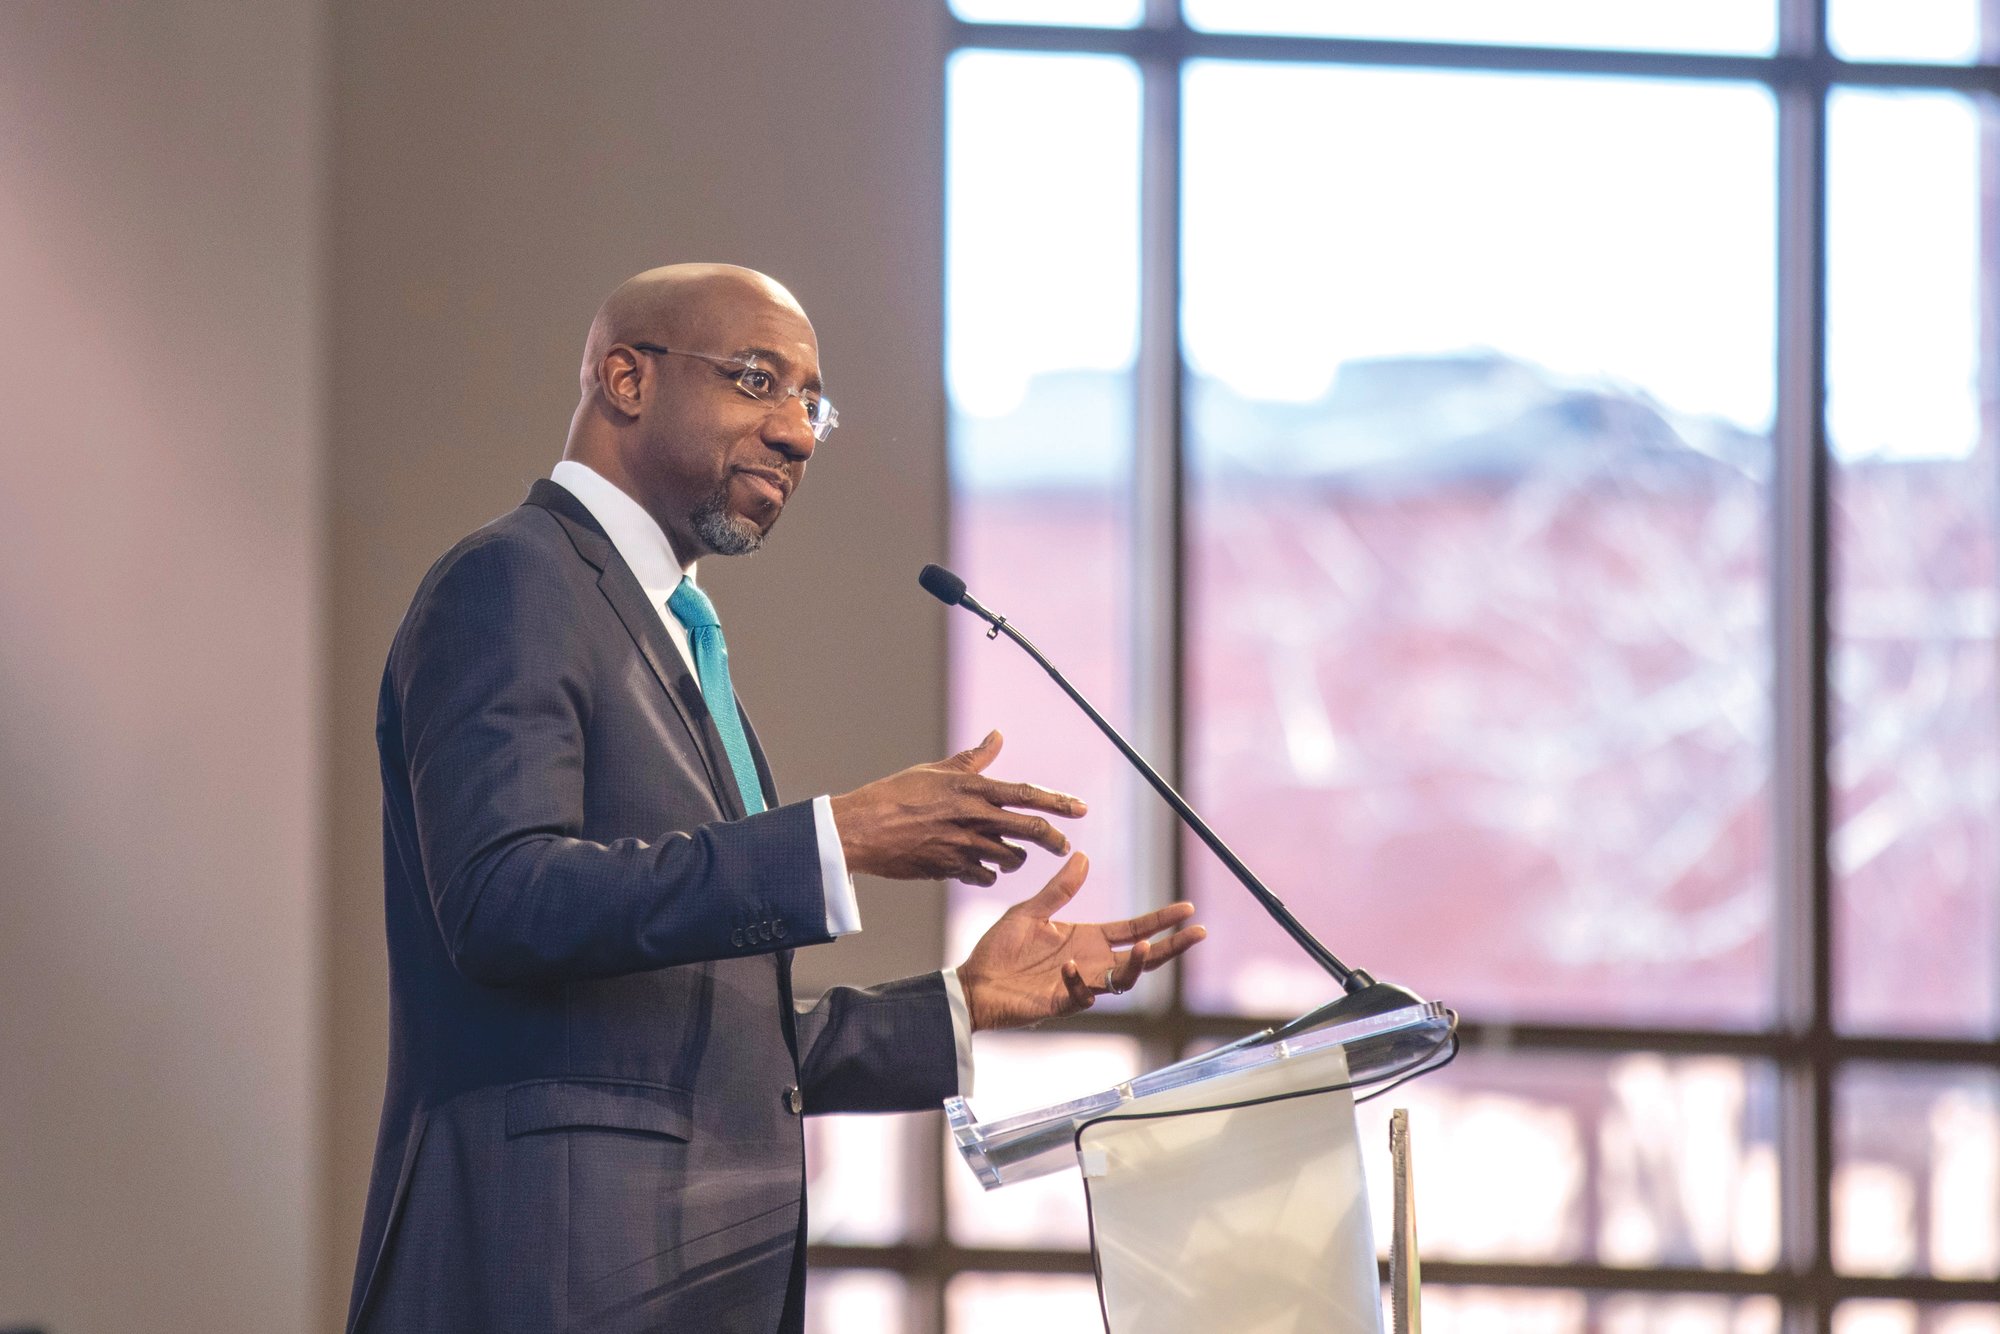 The Rev. Raphael G. Warnock speaks during the Martin Luther King Jr. annual commemorative service at Ebenezer Baptist Church in Atlanta on Monday.